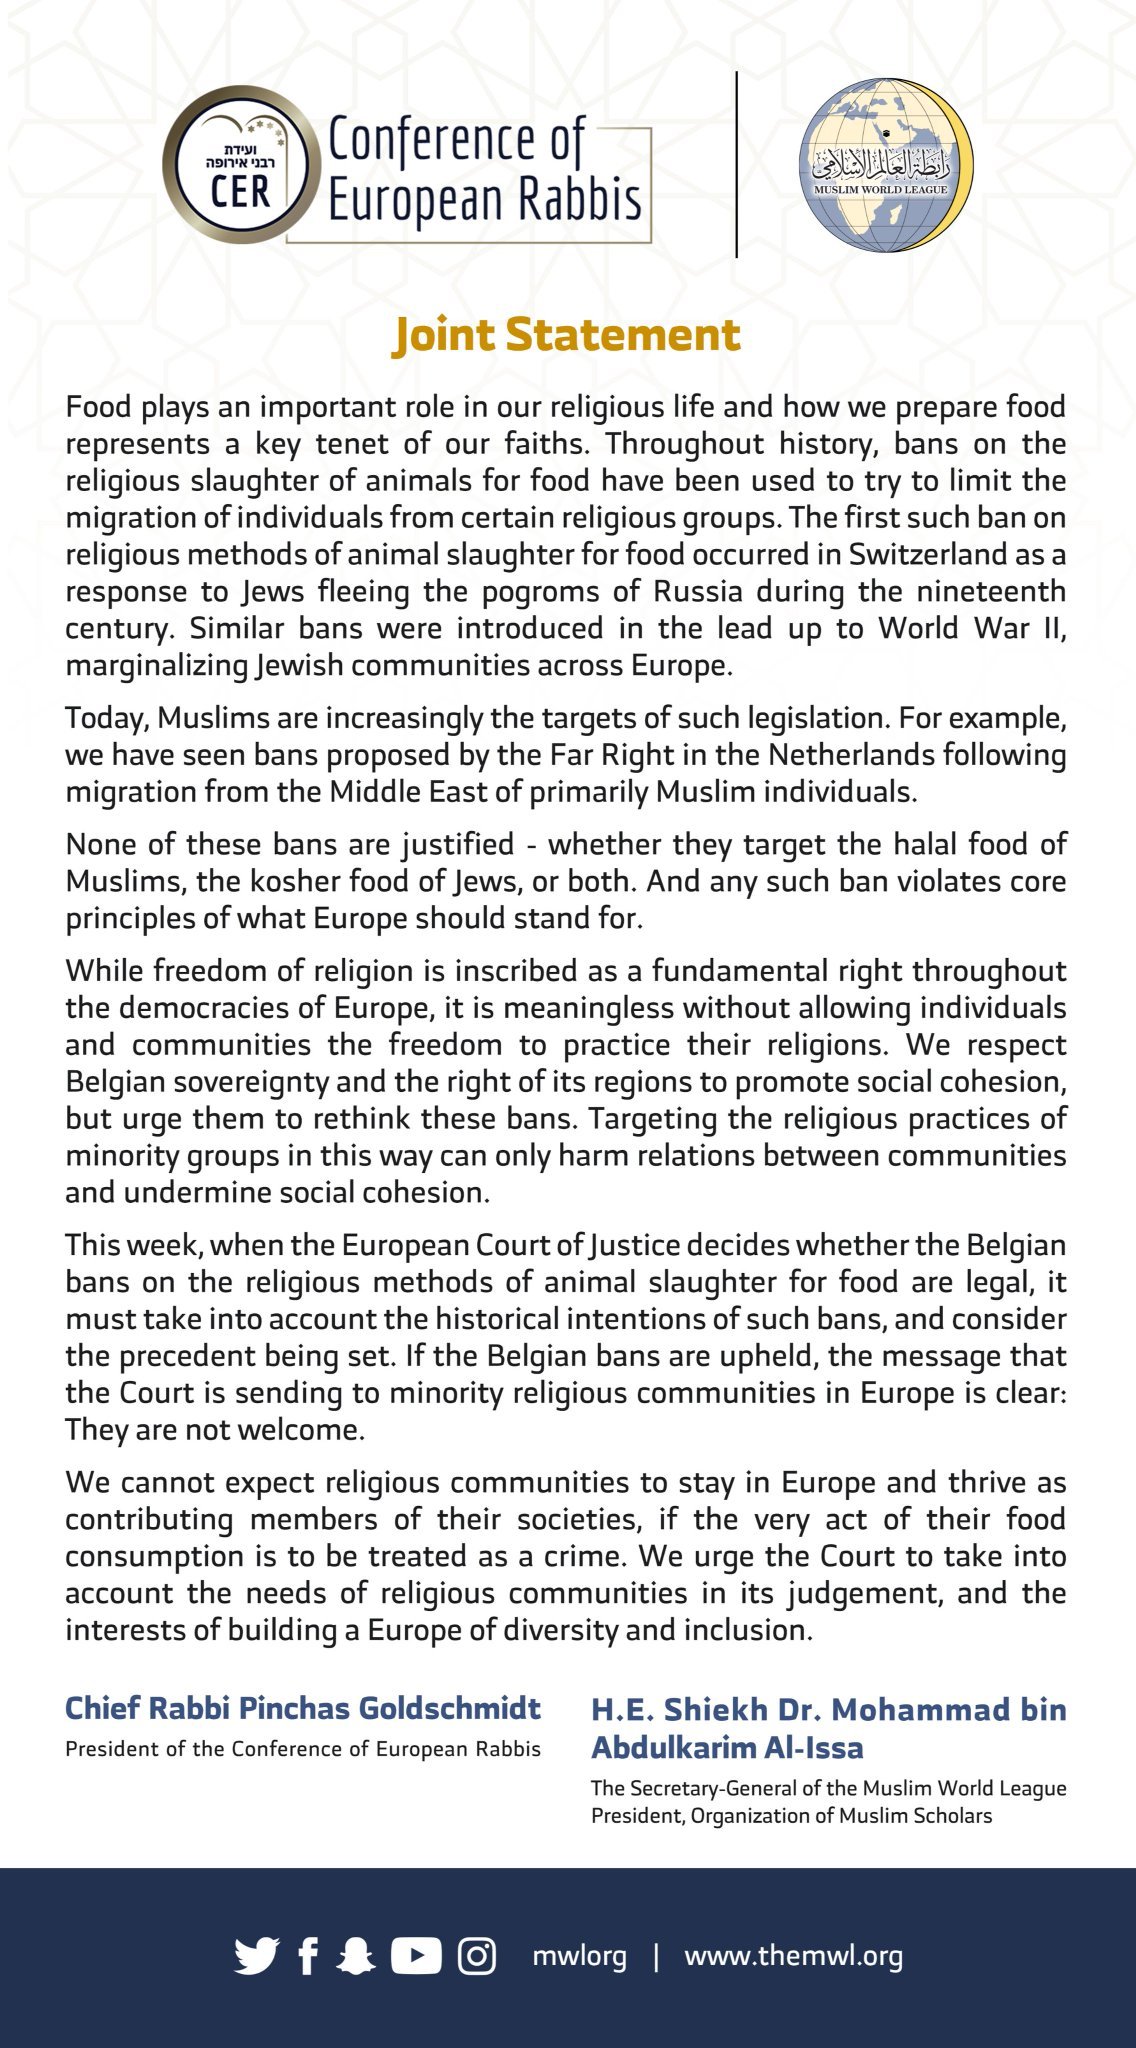 Earlier this month, MWL issued a joint statement with europeanrabbis